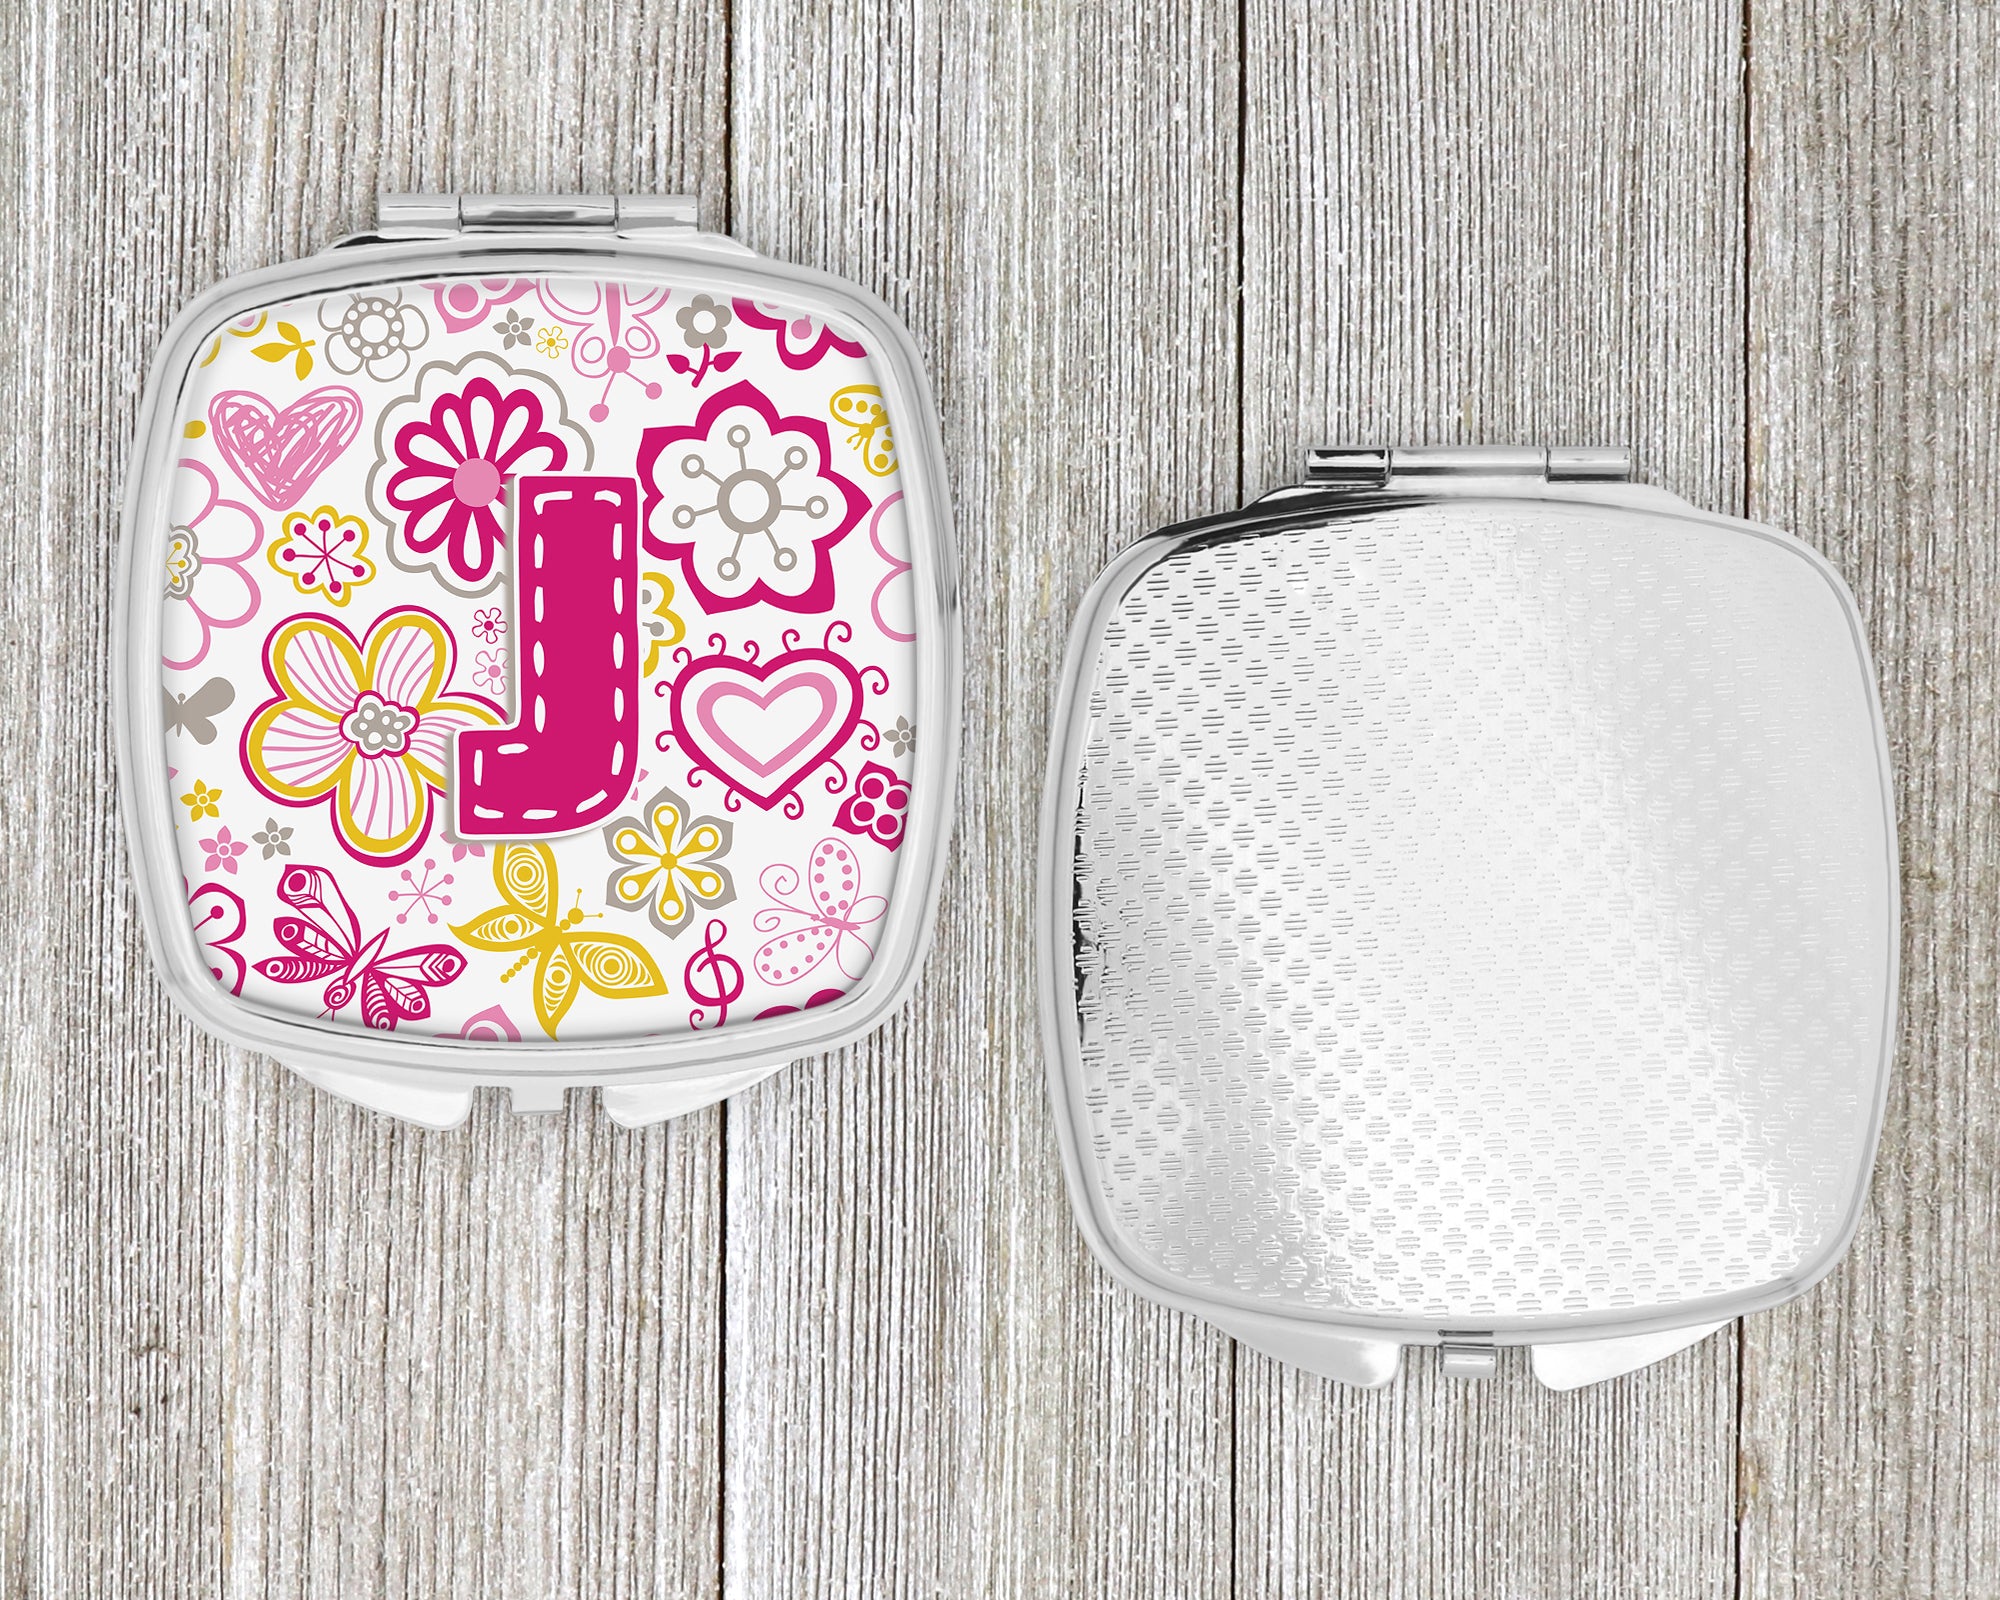 Letter J Flowers and Butterflies Pink Compact Mirror CJ2005-JSCM  the-store.com.